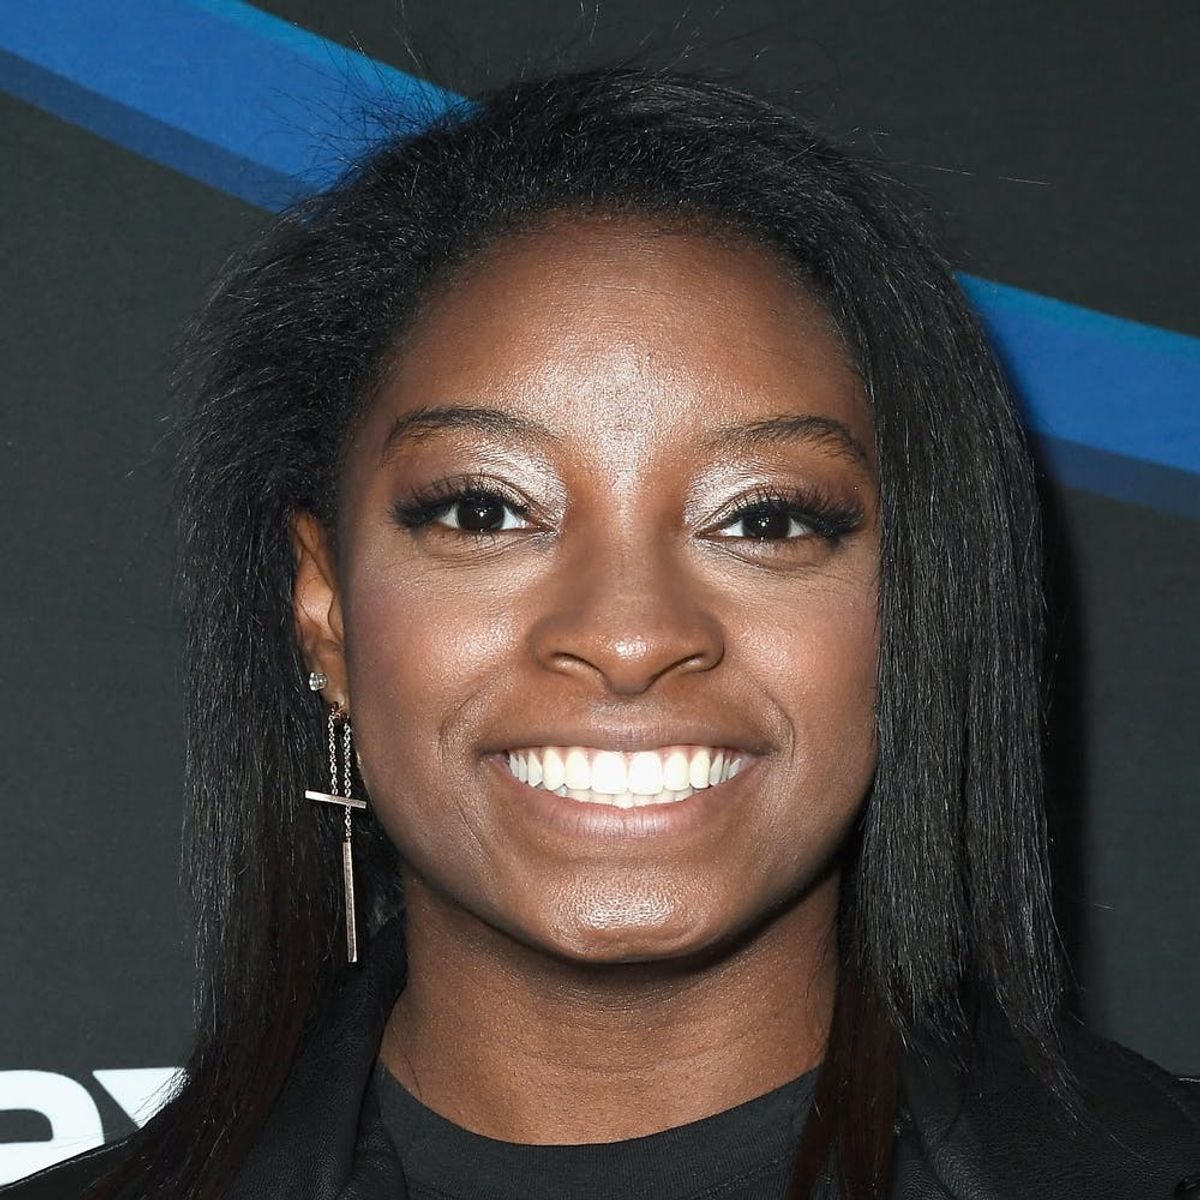 Find Out the Absurd Reason One Man Is Asking Simone Biles for $1,000